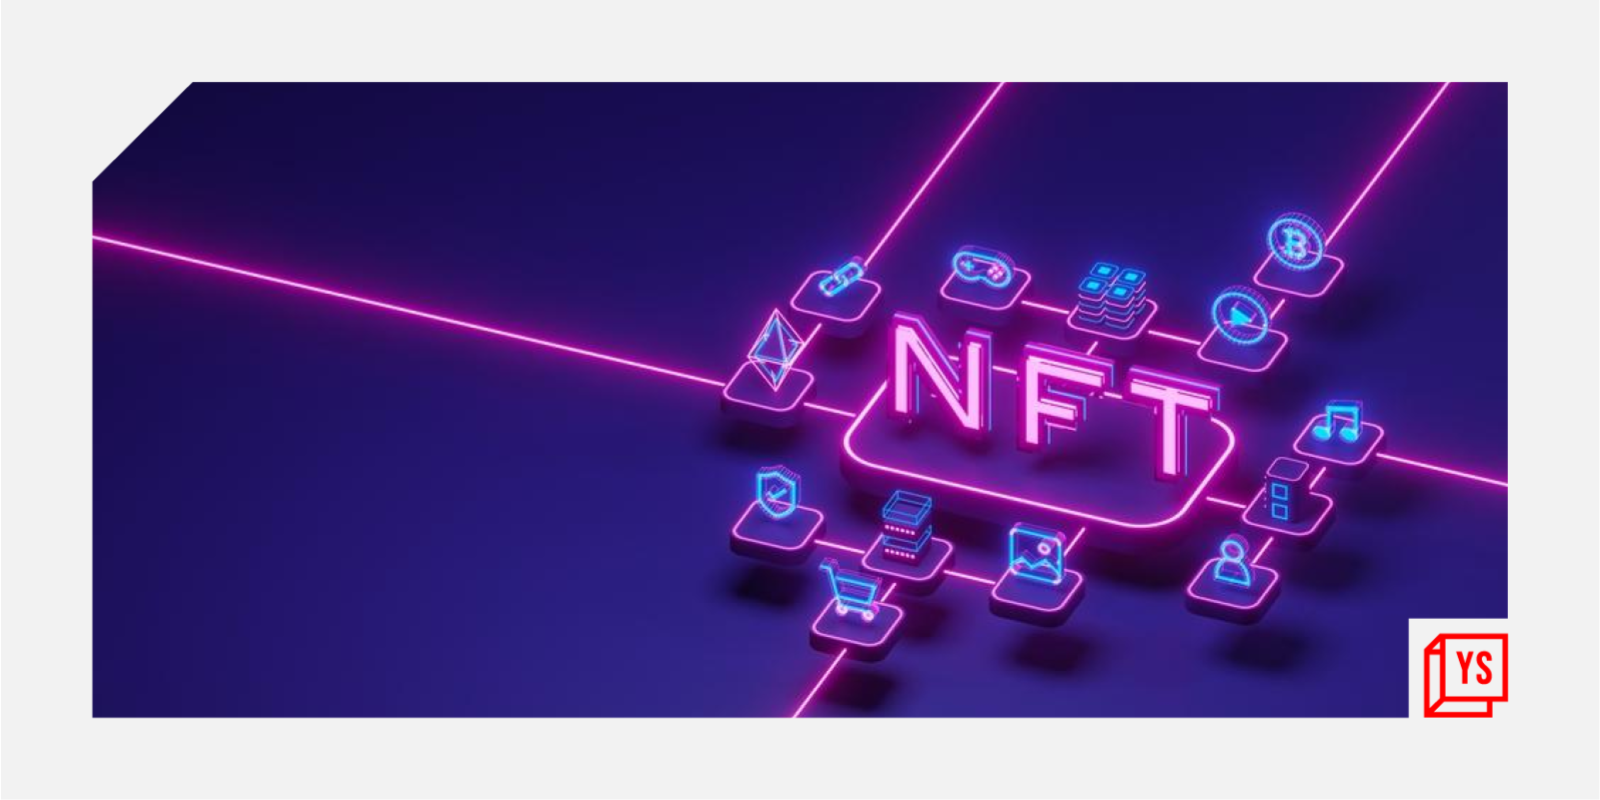 The convergence of cinema and NFTs

